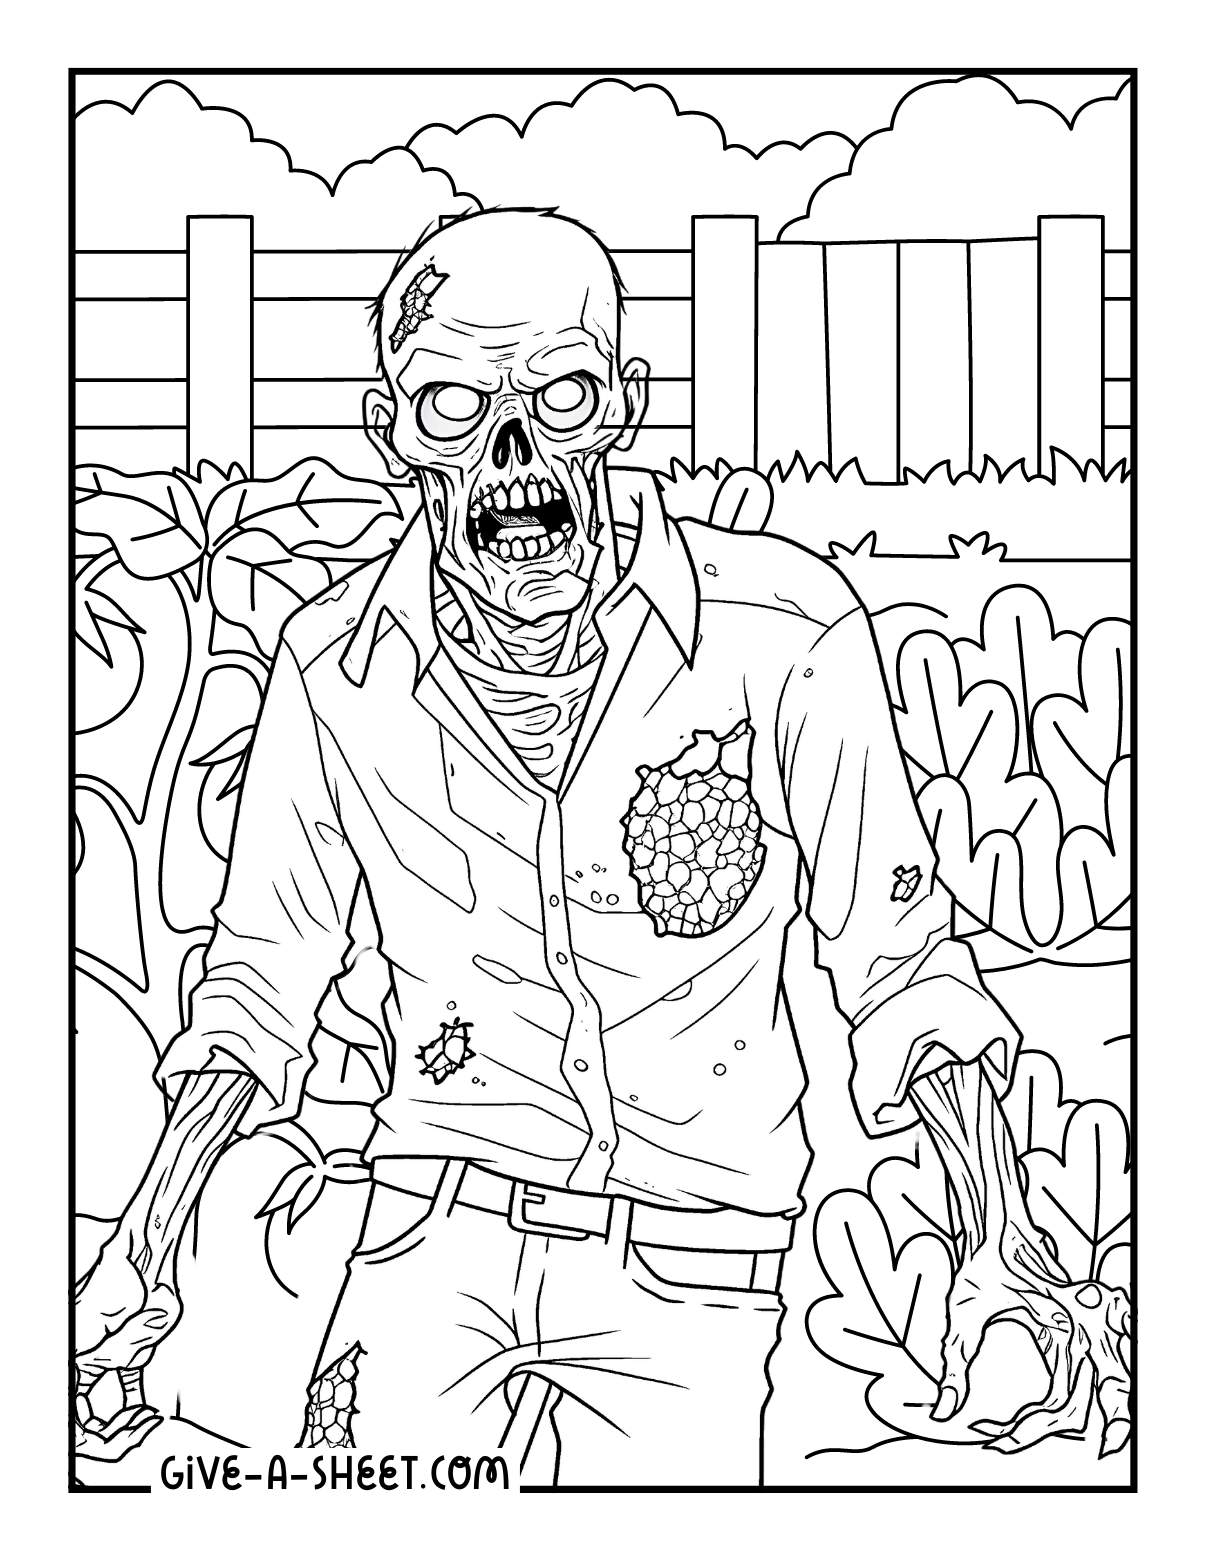 Zombie garden warfare coloring sheets for adults.